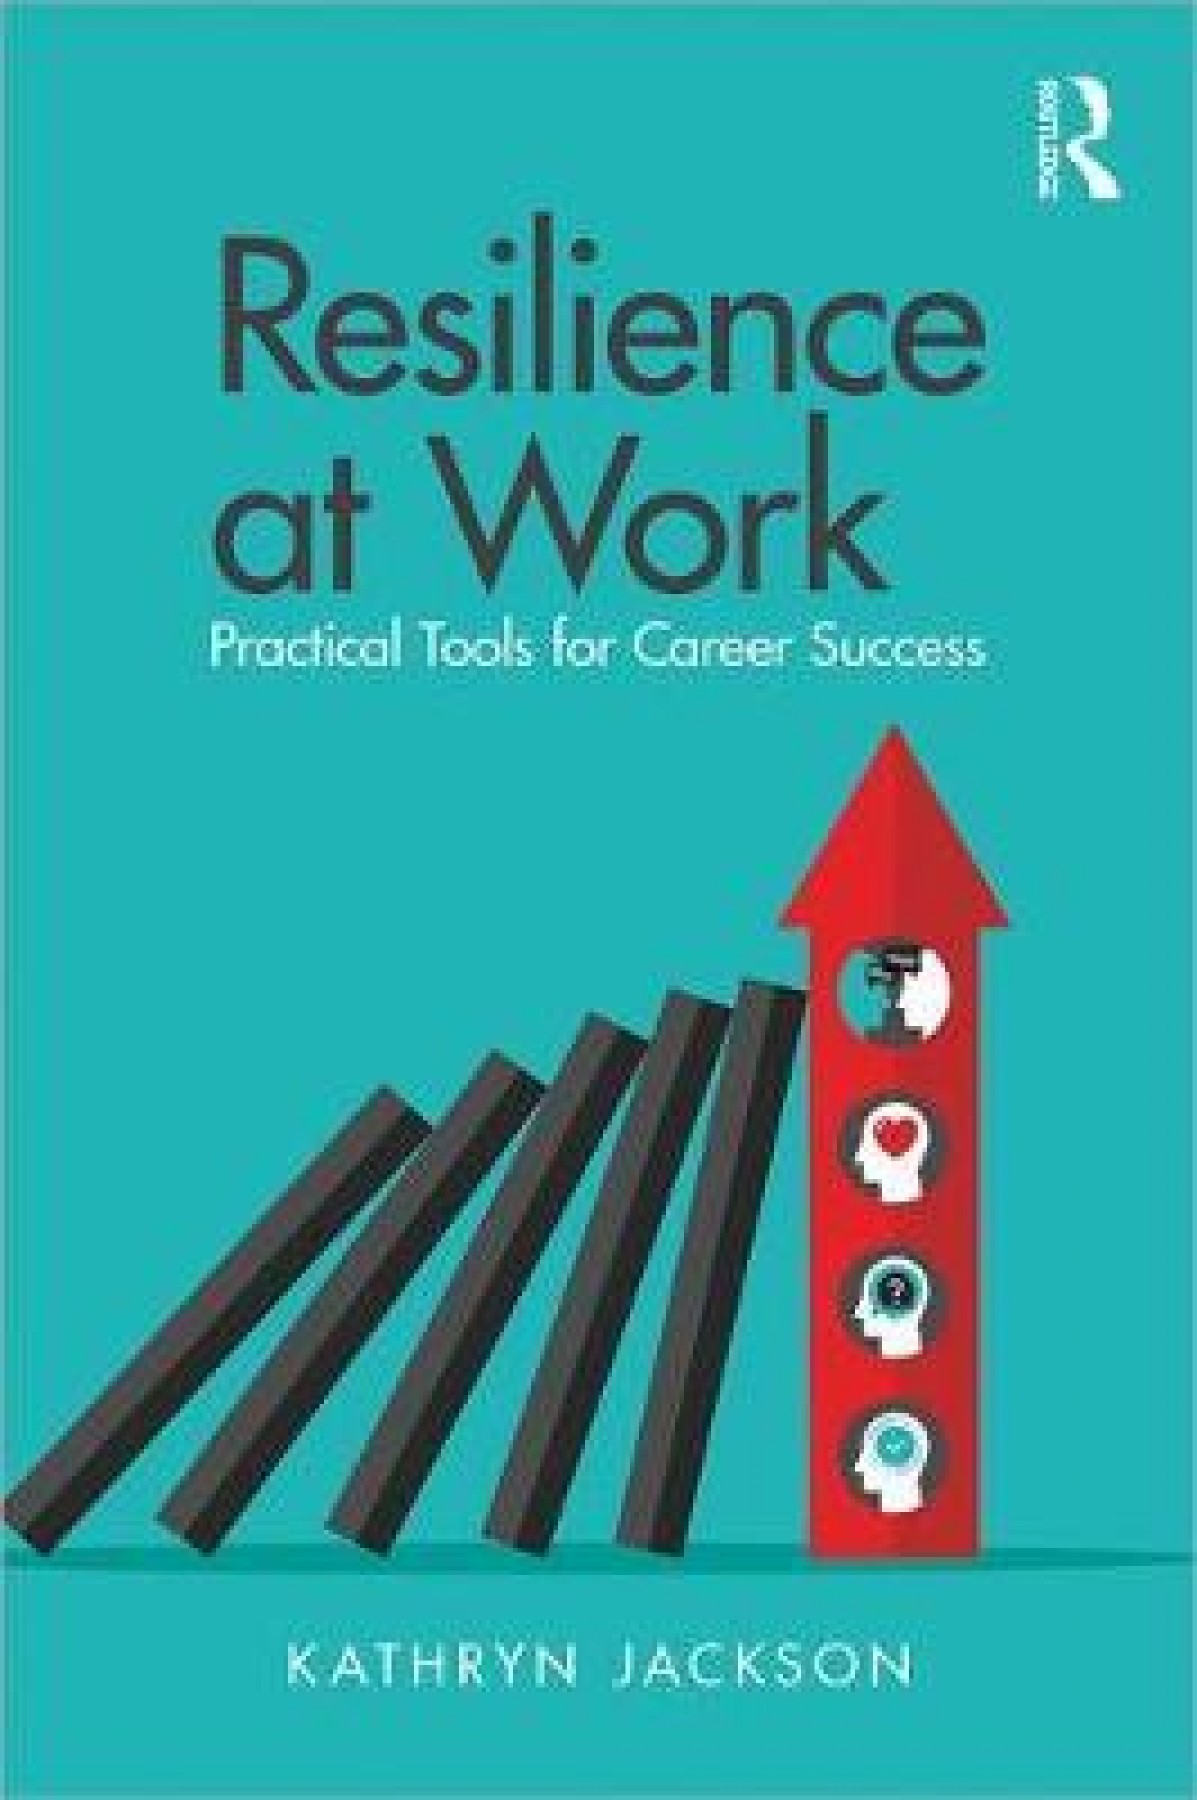 Resilience at work: Practical tools for career success